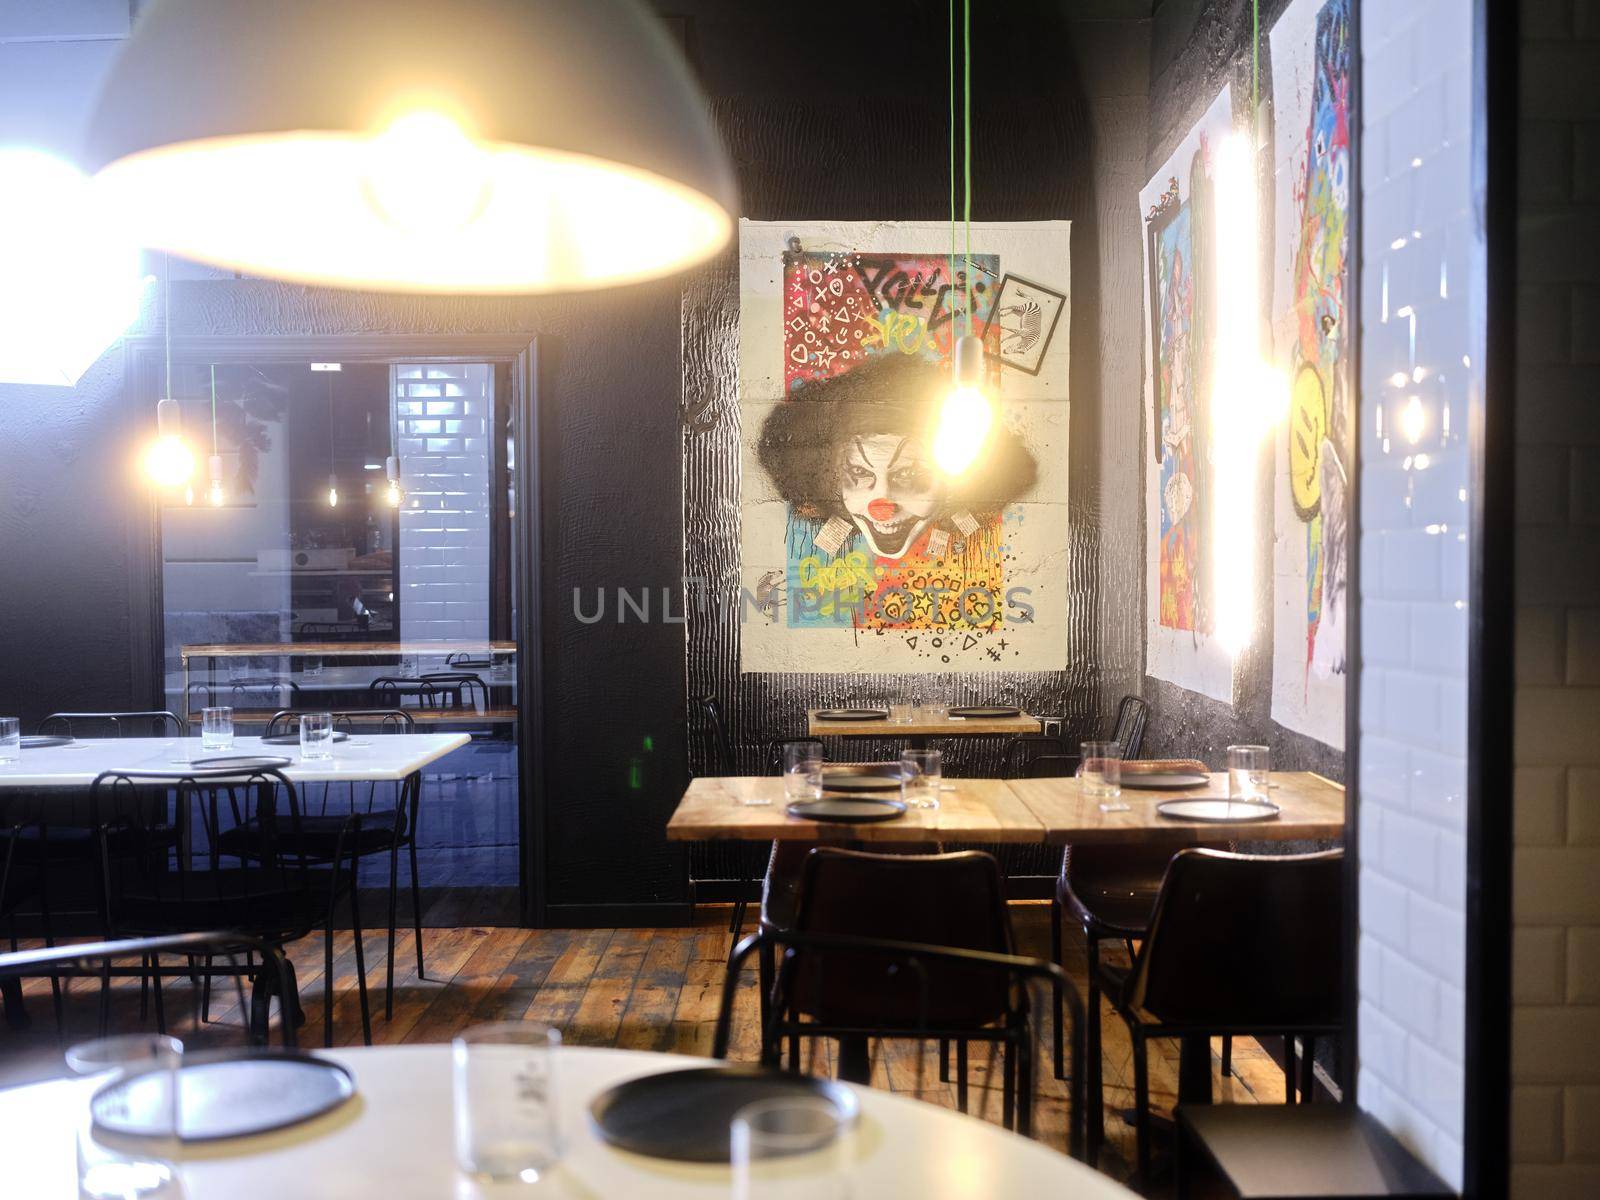 Restaurant decorated with modern art paintings without people inside